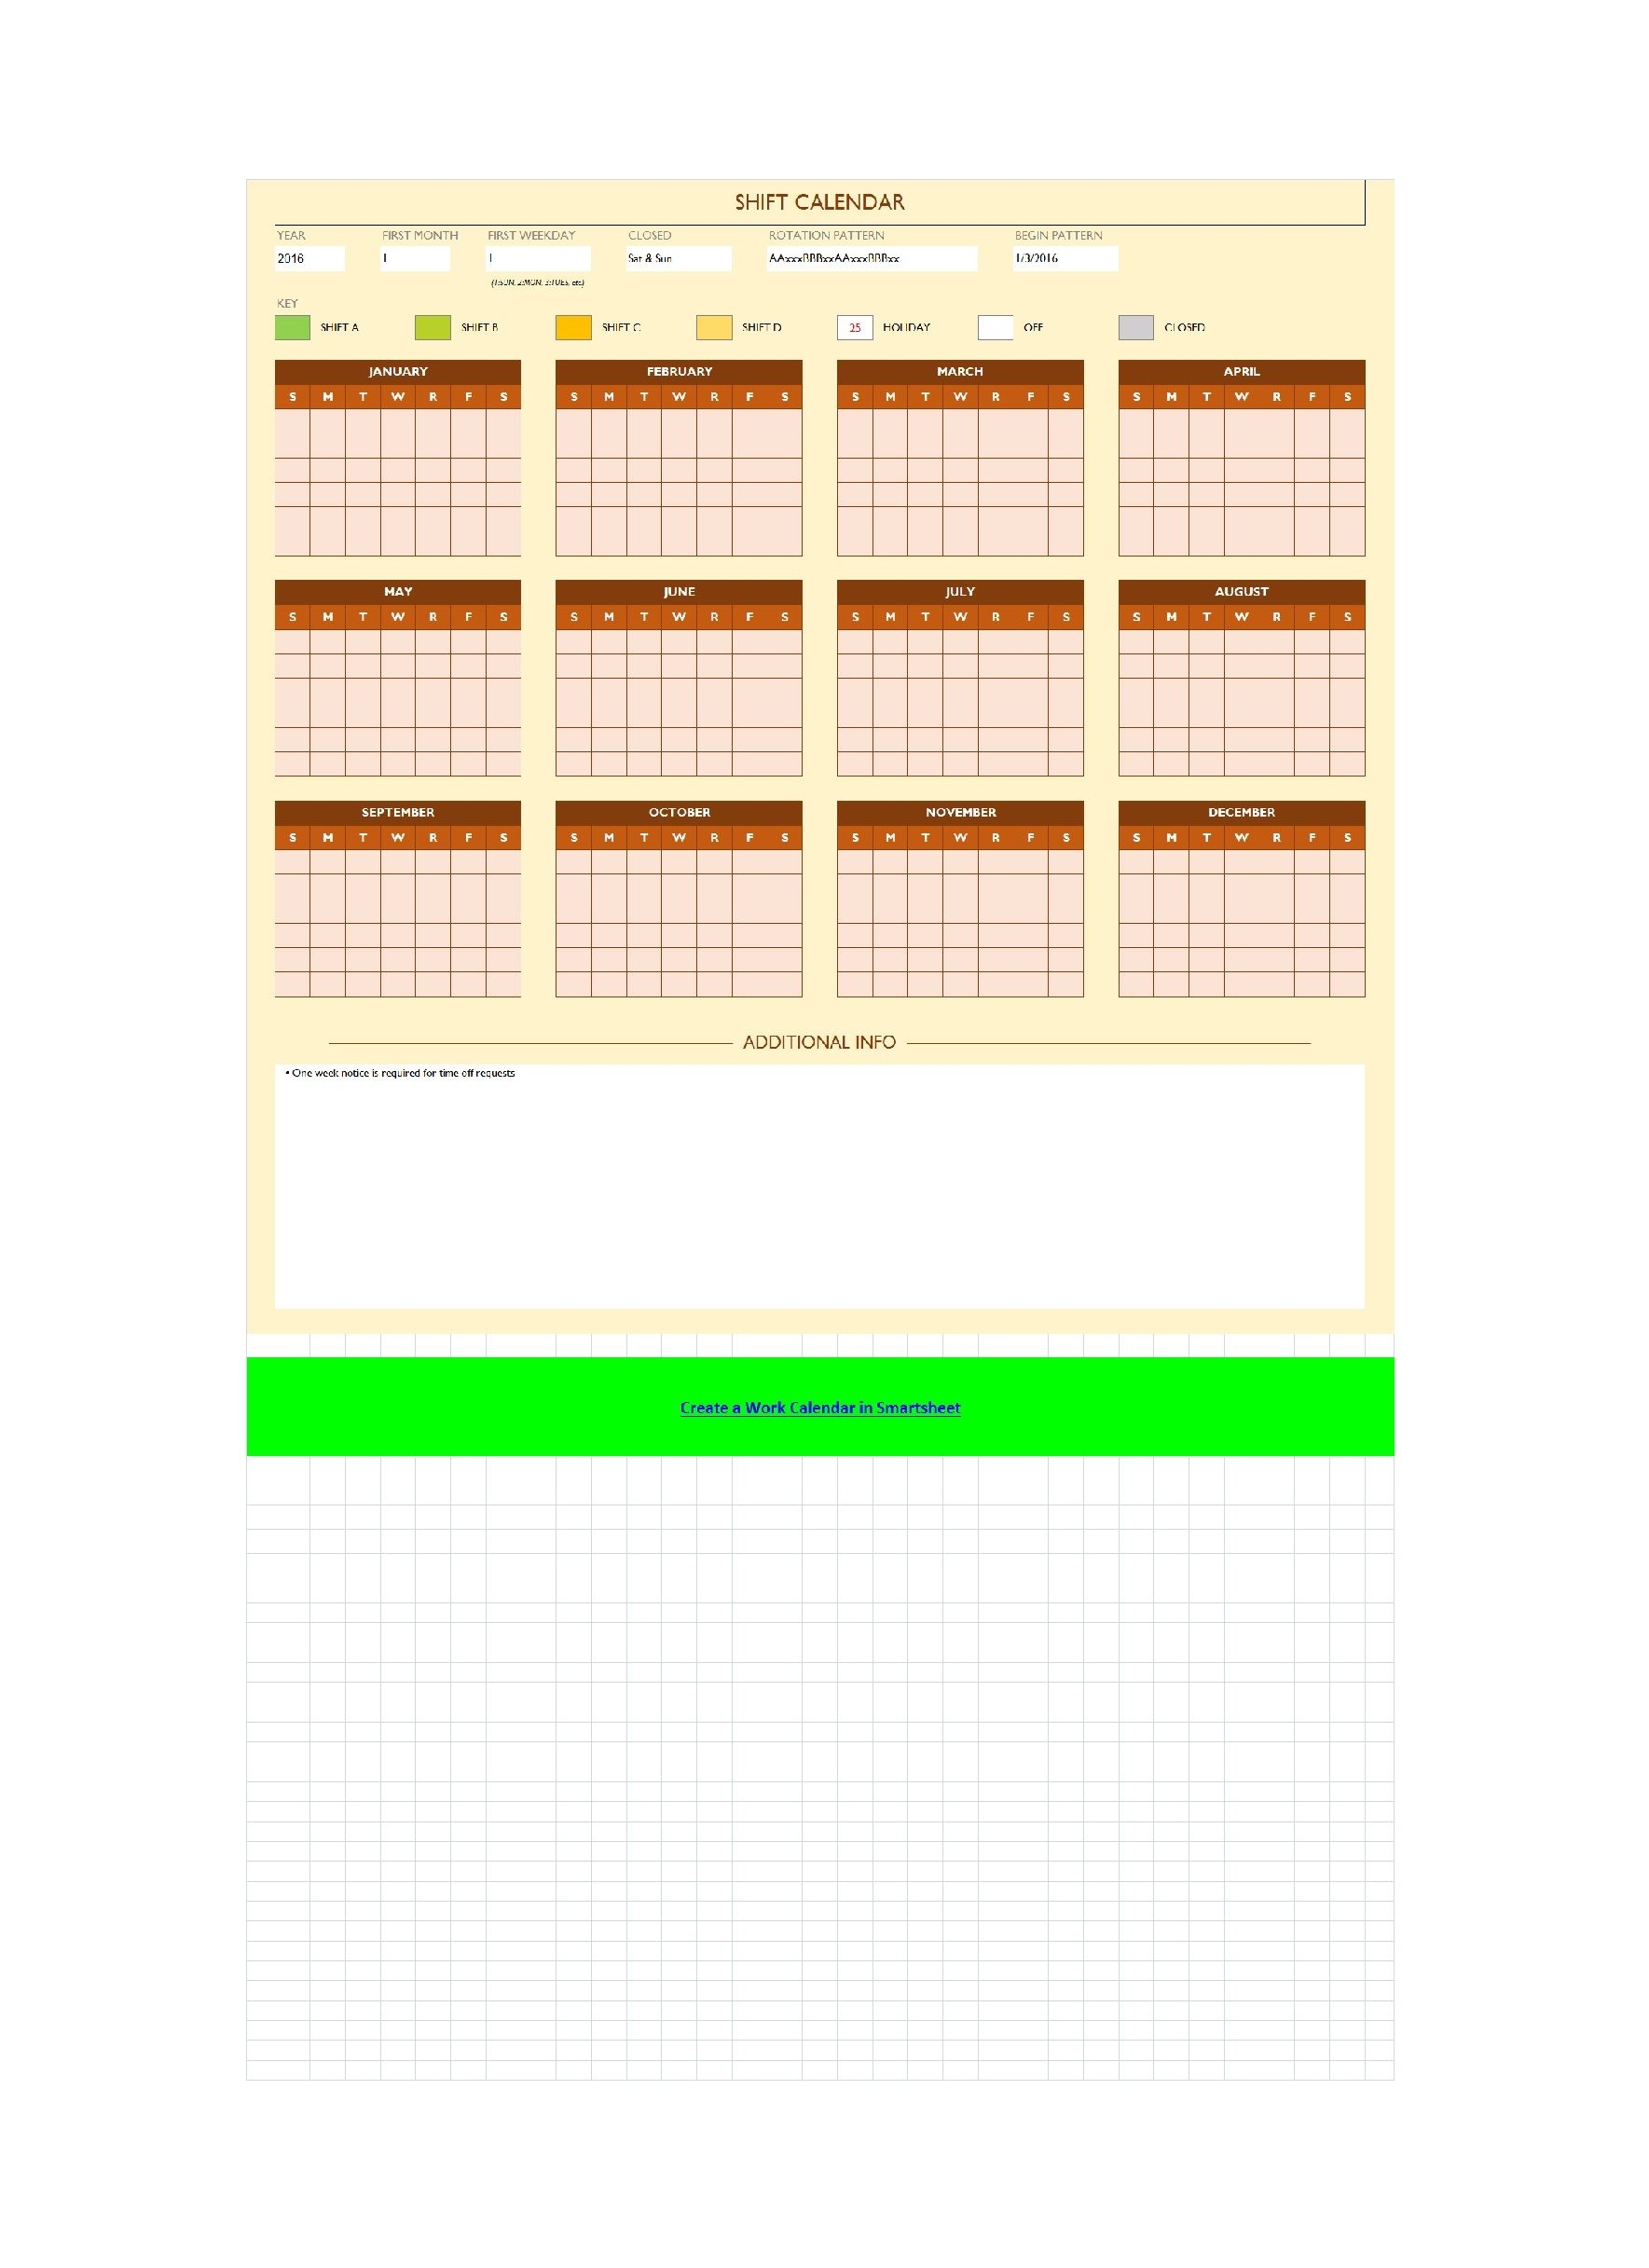 50 Free Rotating Schedule Templates For Your Company